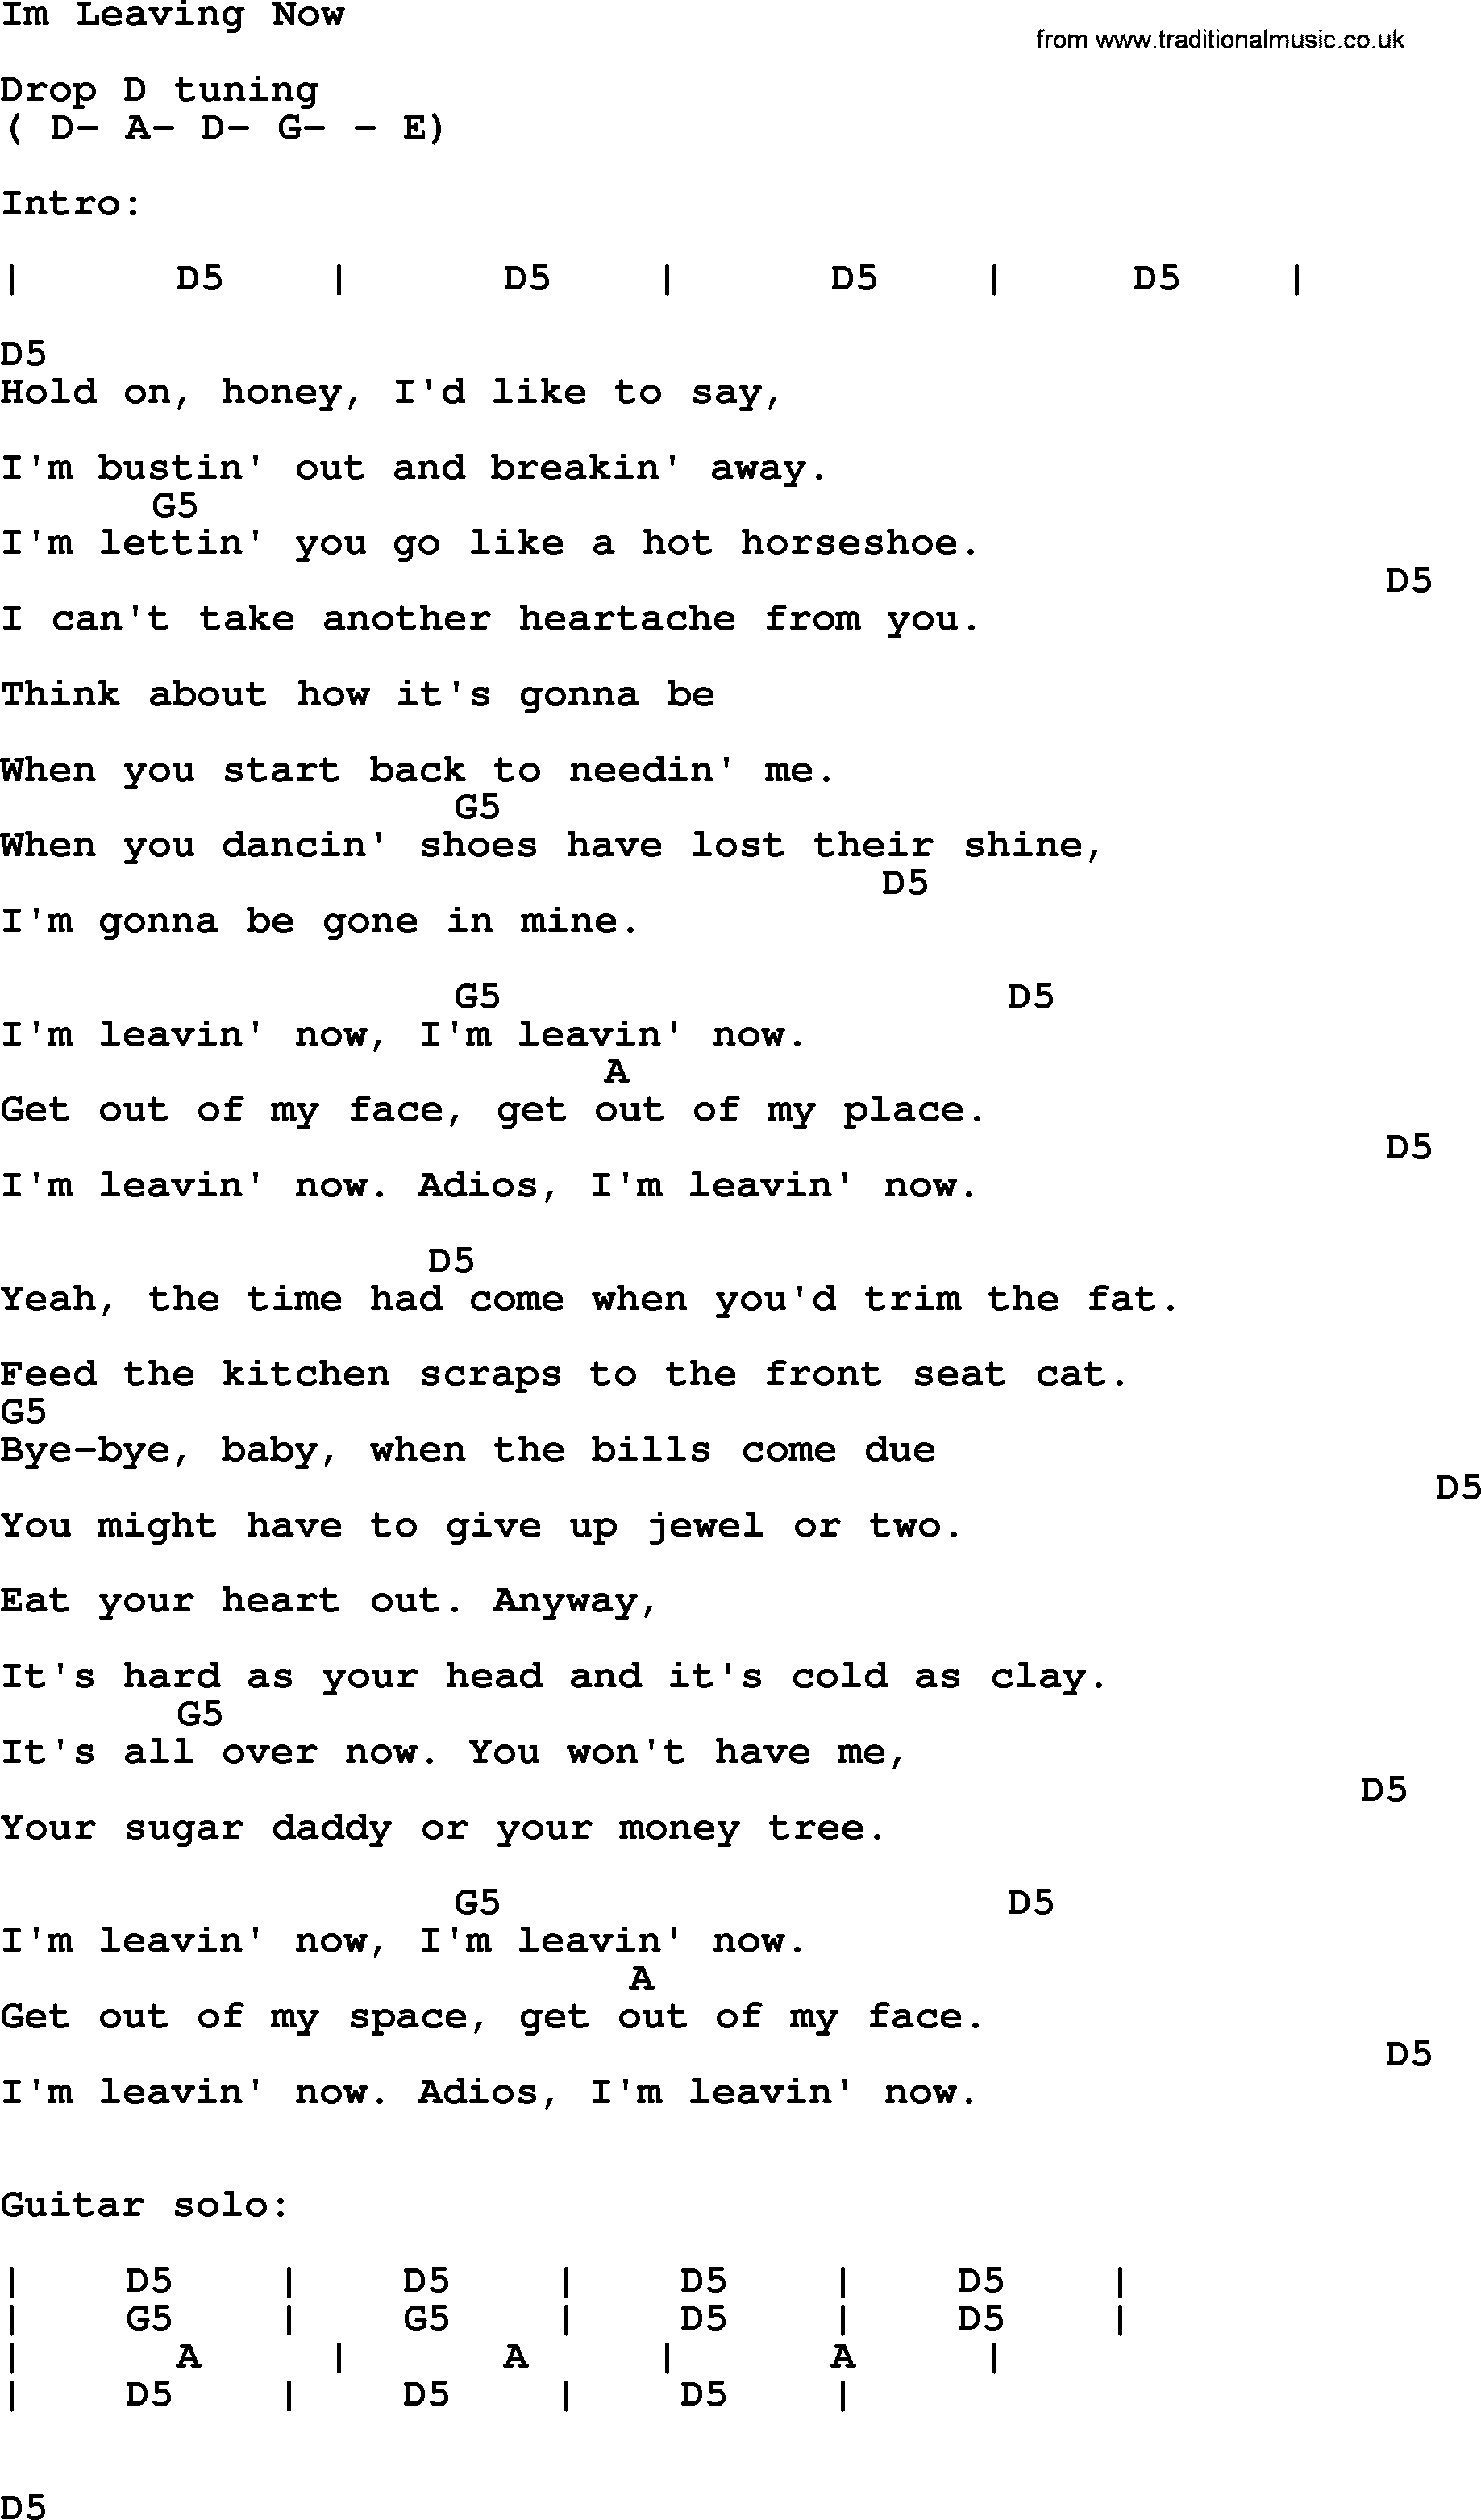 Johnny Cash song Im Leaving Now, lyrics and chords